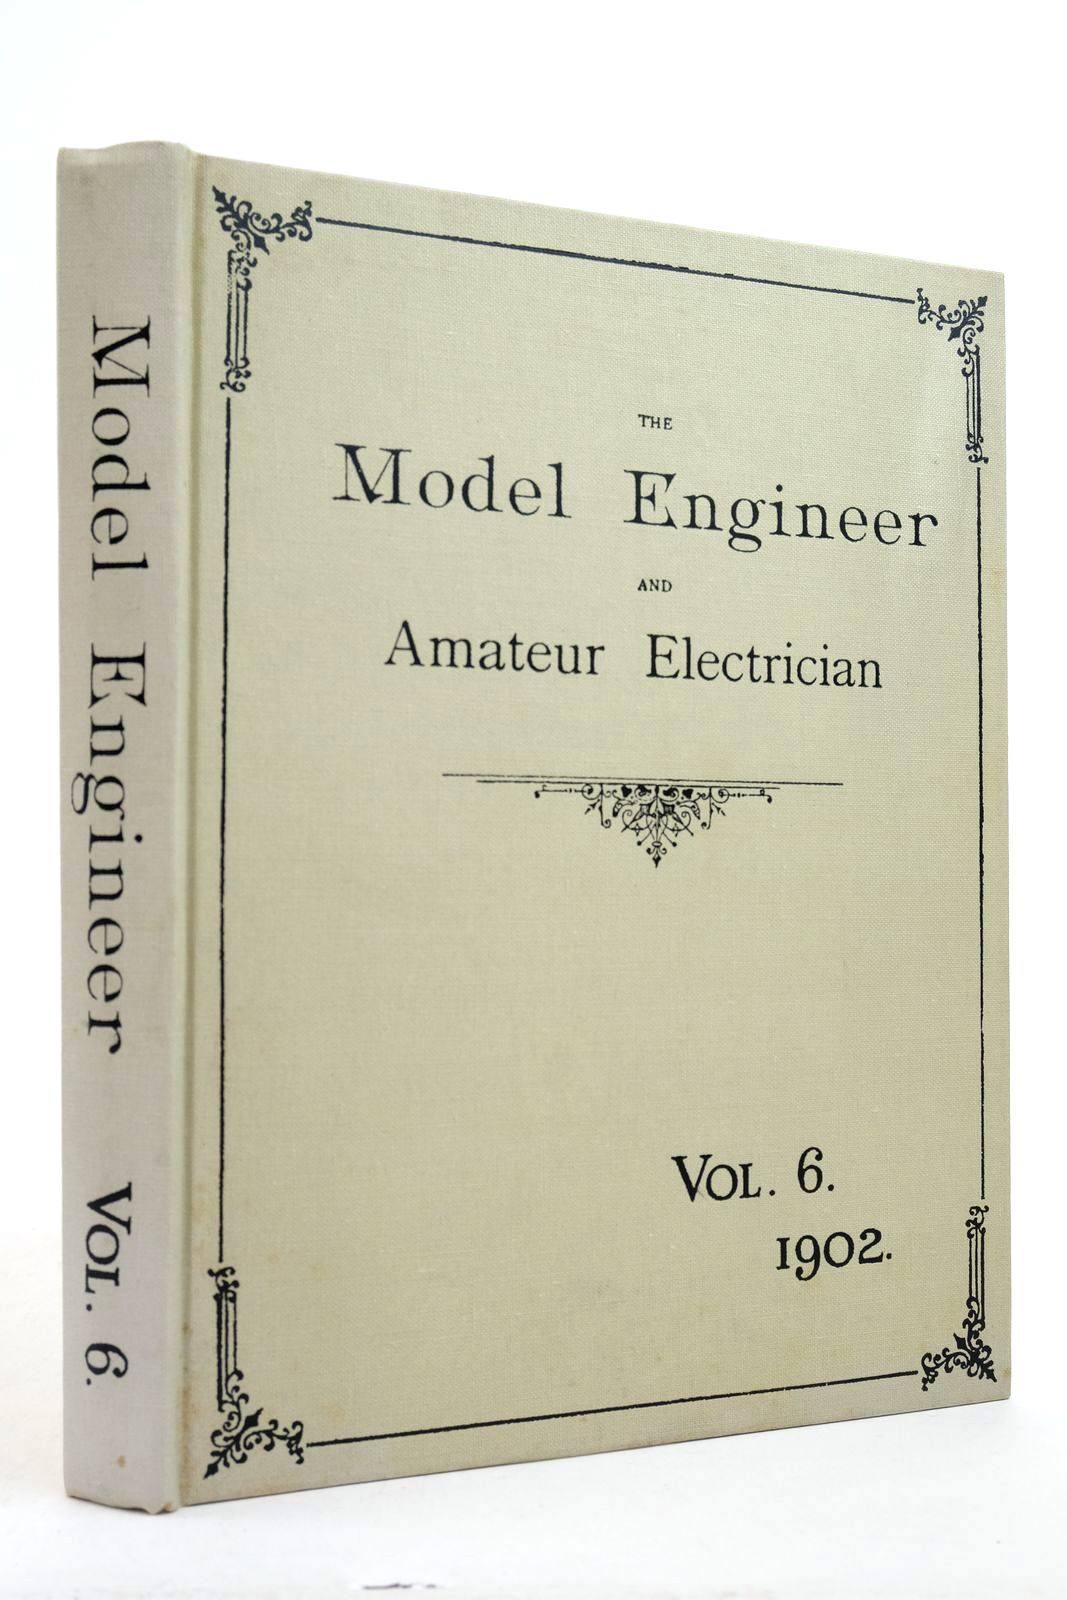 Photo of THE MODEL ENGINEER AND AMATEUR ELECTRICIAN VOL. VI - 1902 written by Marshall, Percival published by Dawbarn &amp; Ward Limited, Argus Books Ltd (STOCK CODE: 2139859)  for sale by Stella & Rose's Books